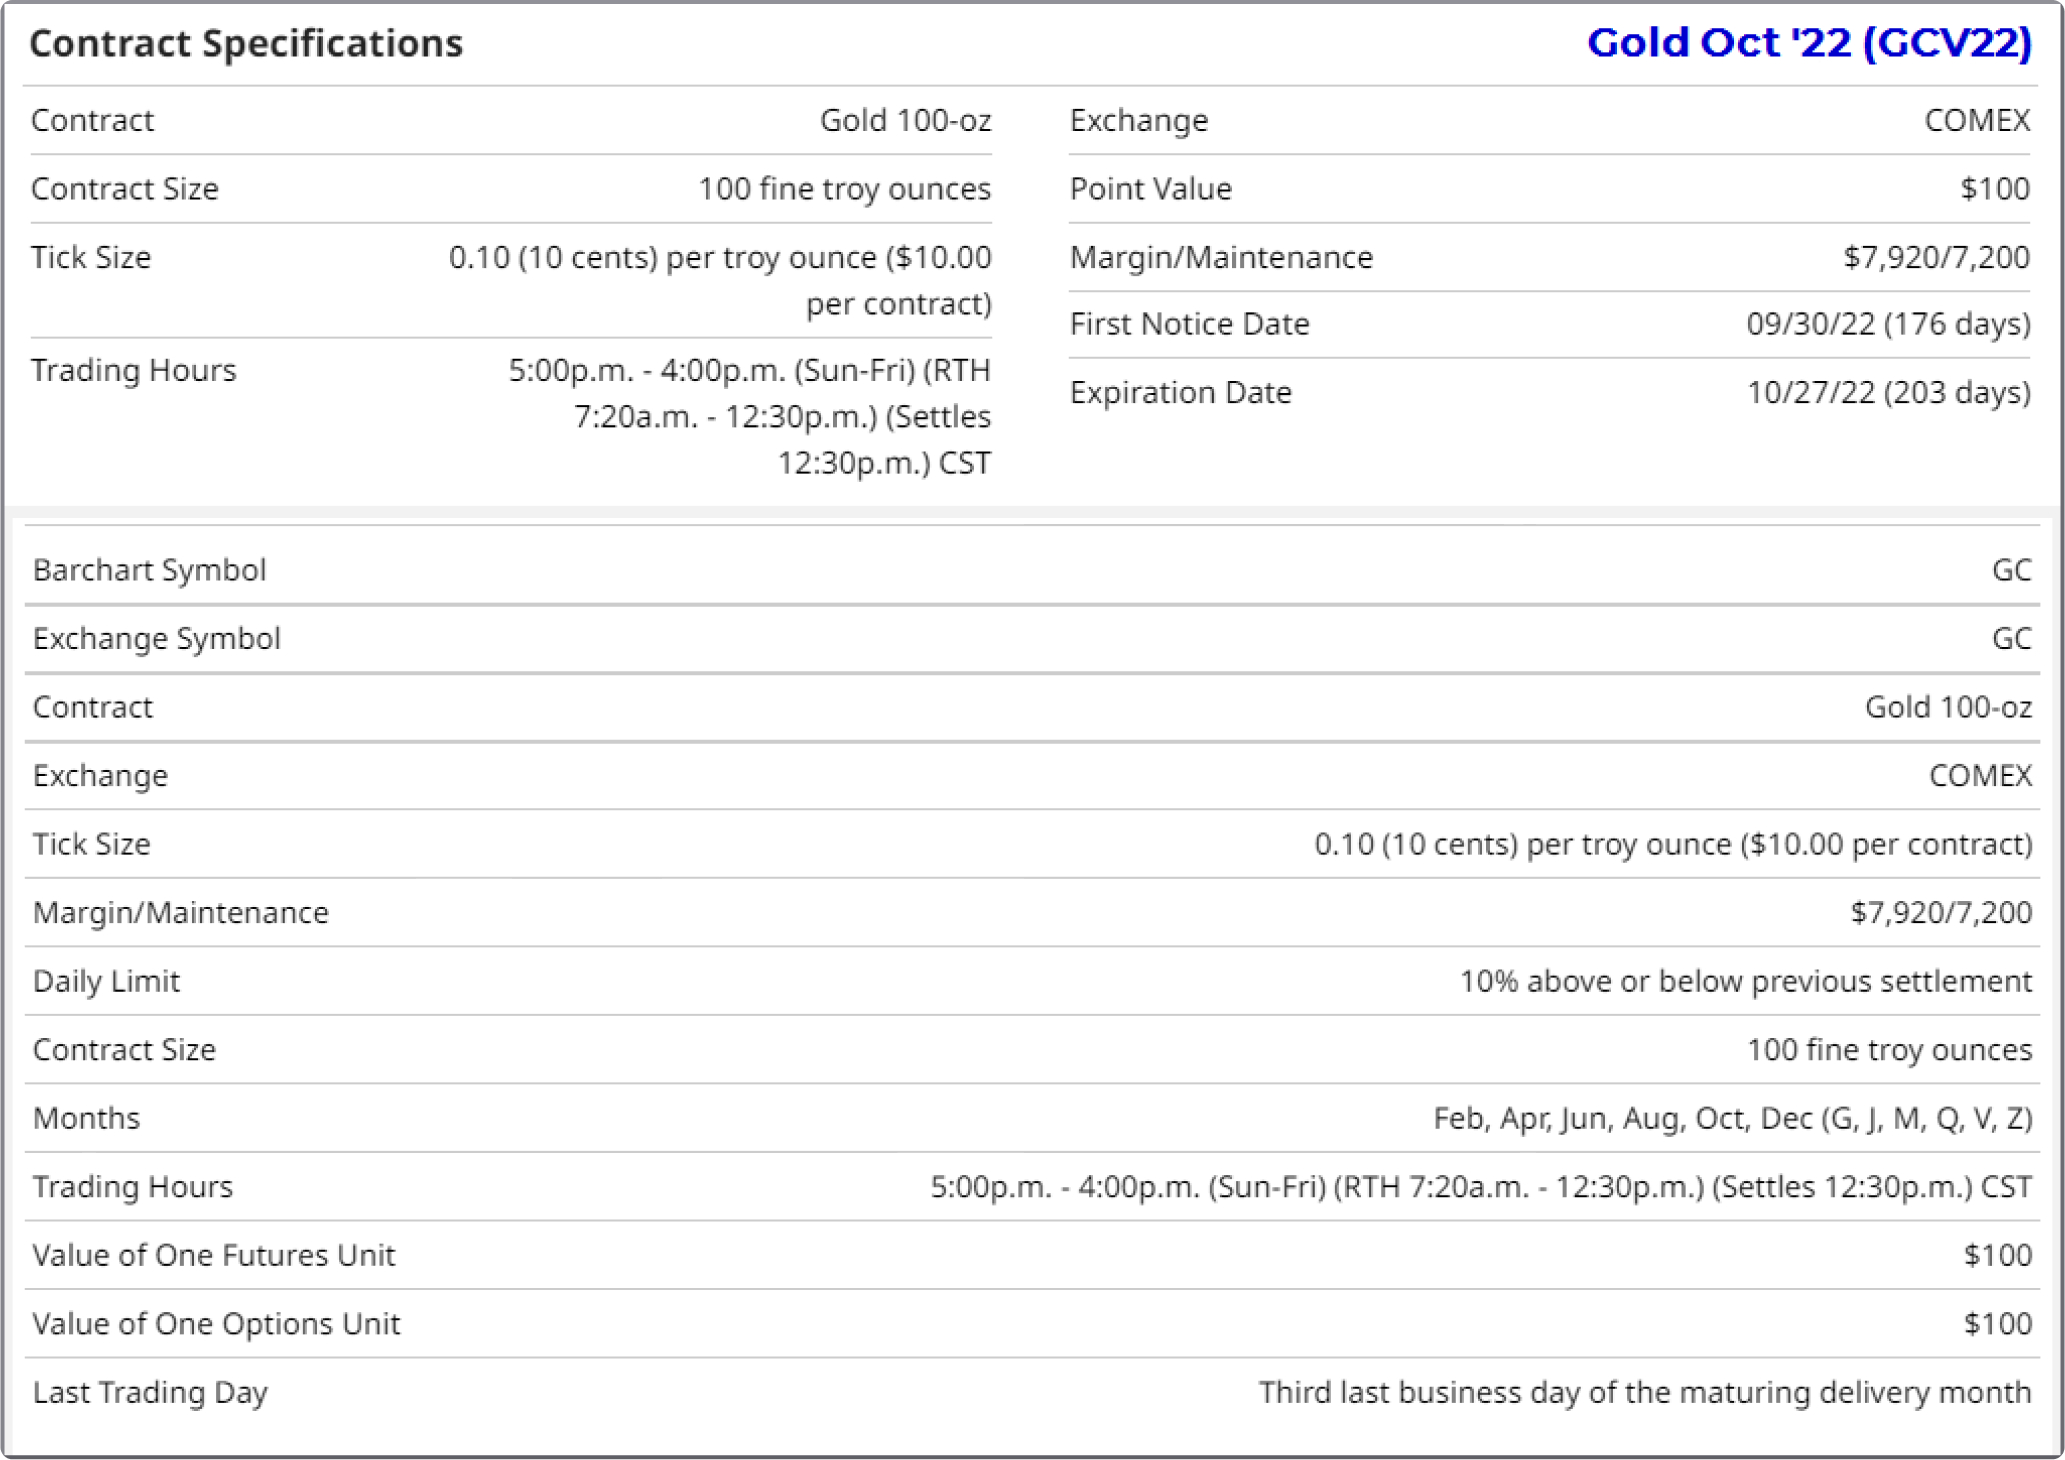 Contract specifications using the example of the October'22 gold contract